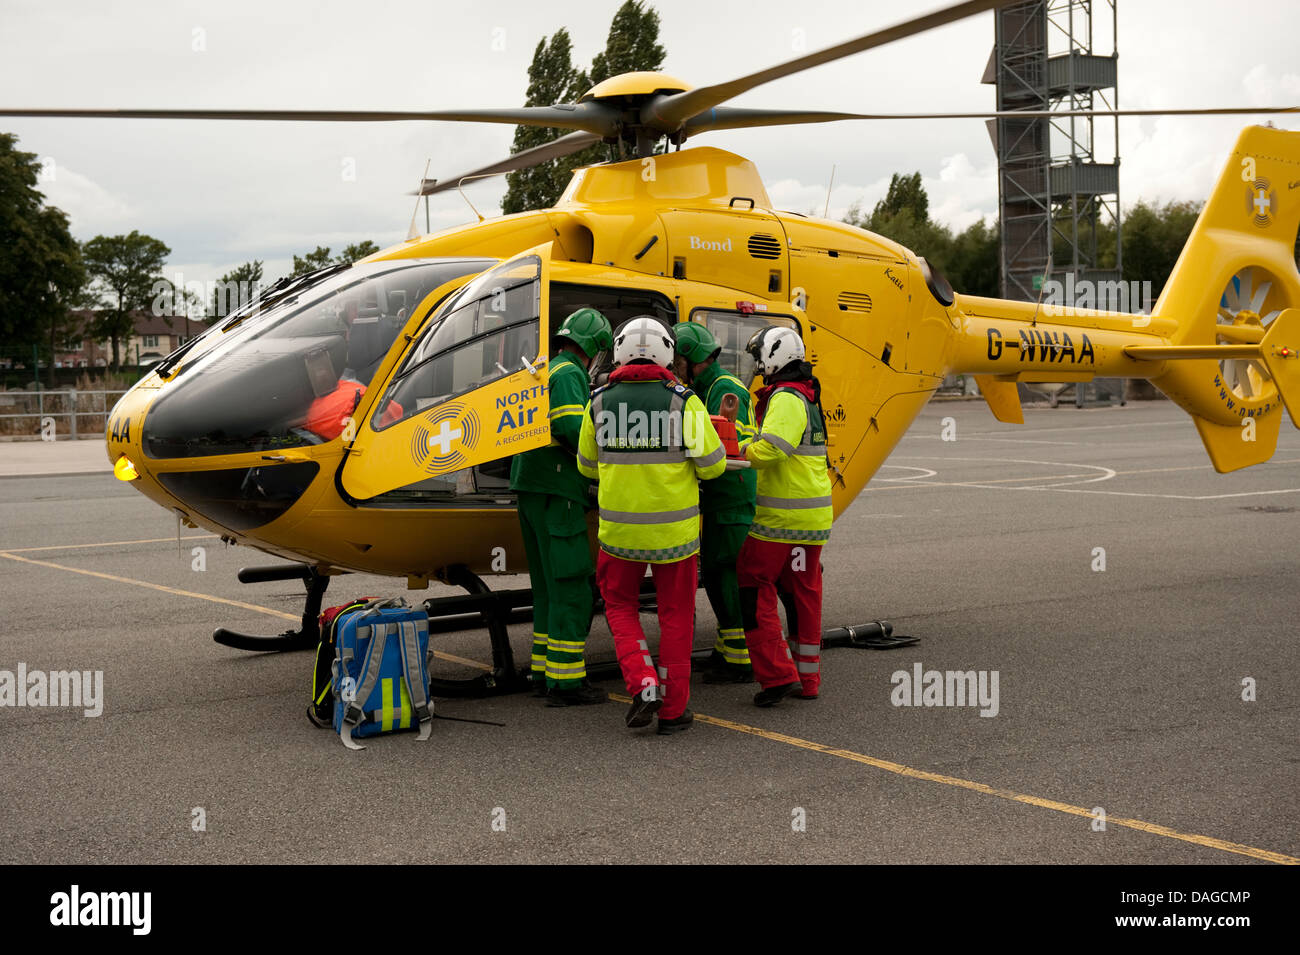 Stretcher Casualty into Ambulance helicopter Stock Photo